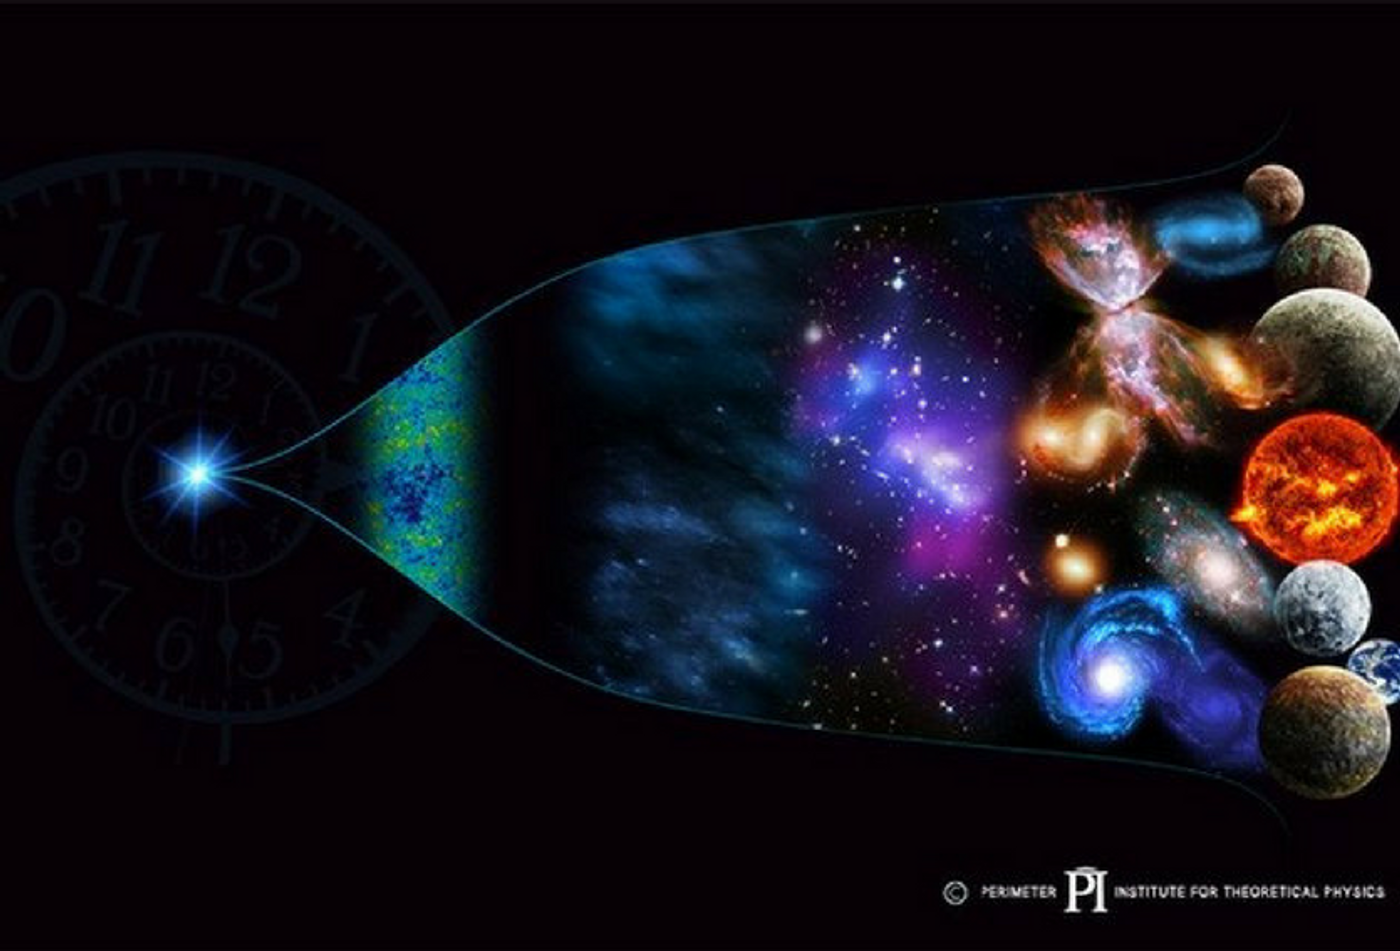 The arrow of time. Credit: the Perimeter Institute For Theoretical Physics